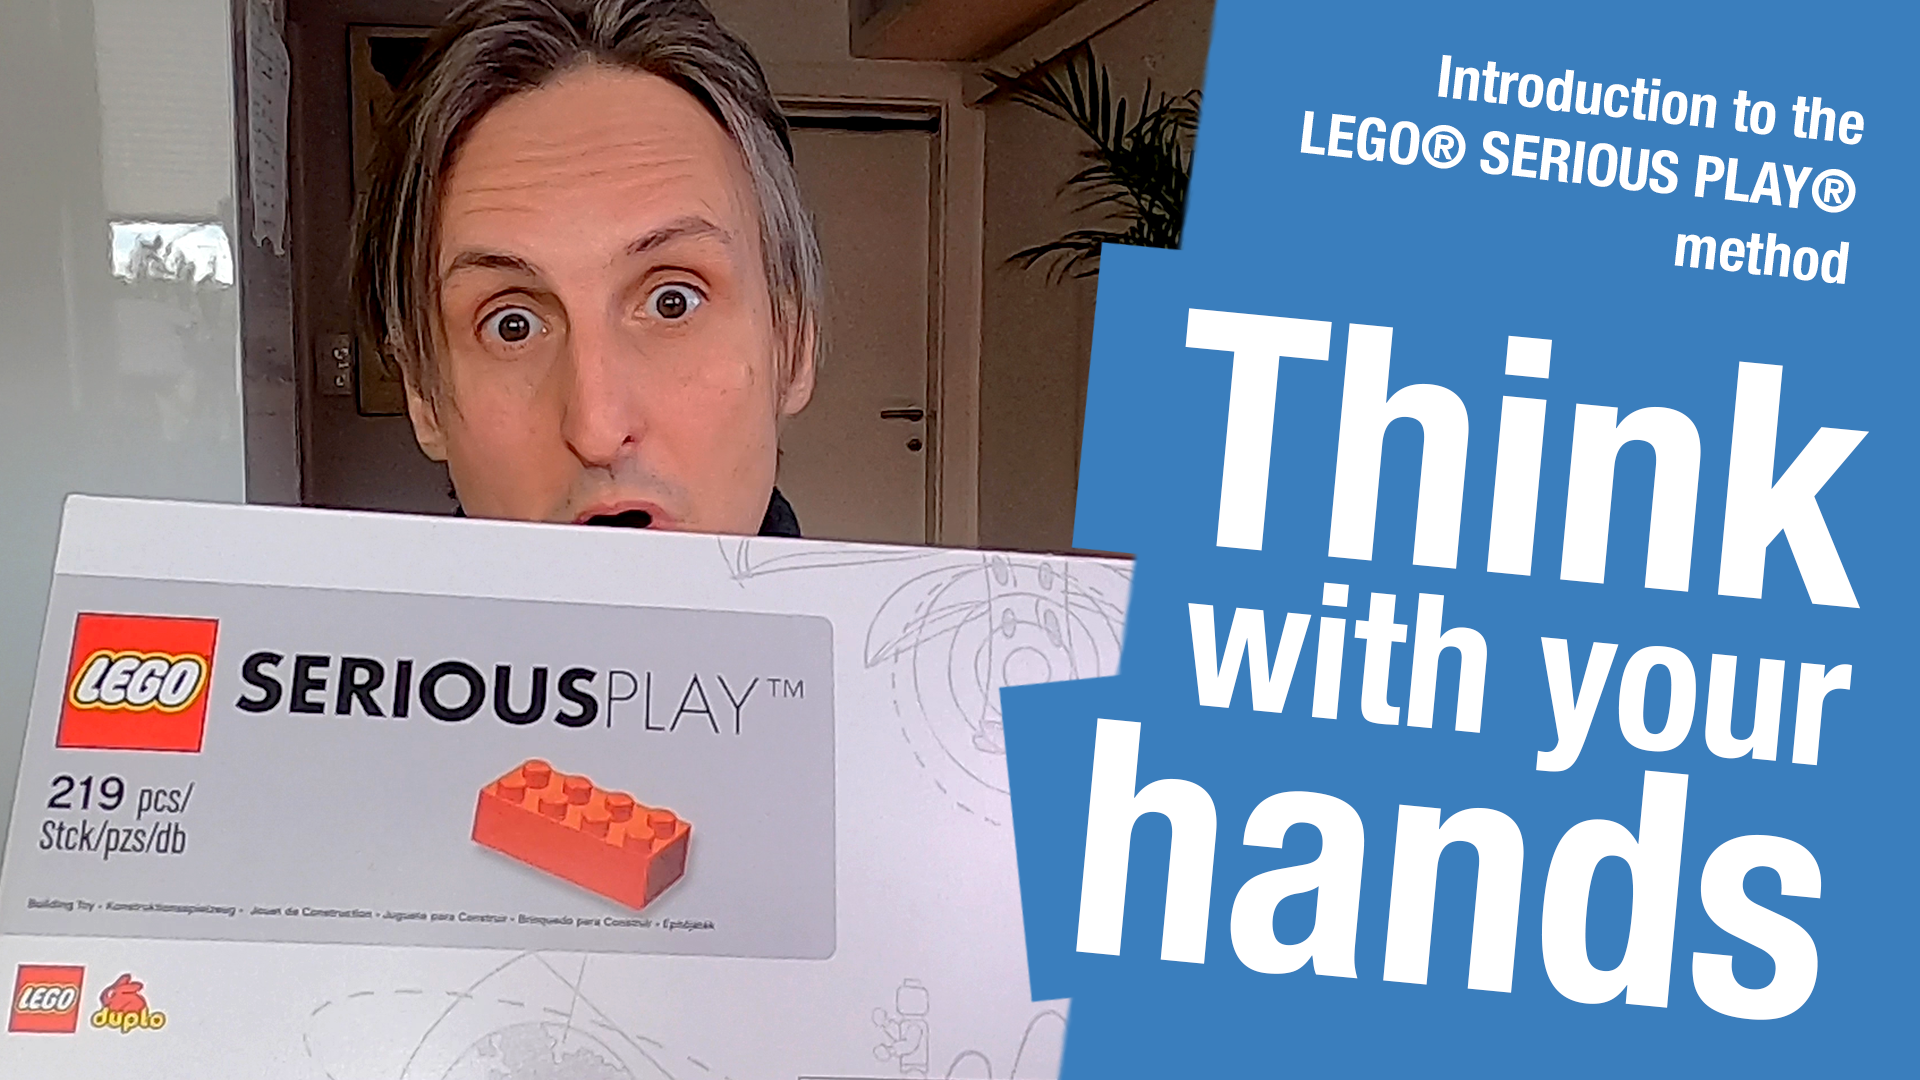 Think with your hands — an introduction to the LEGO® SERIOUS PLAY® methodology